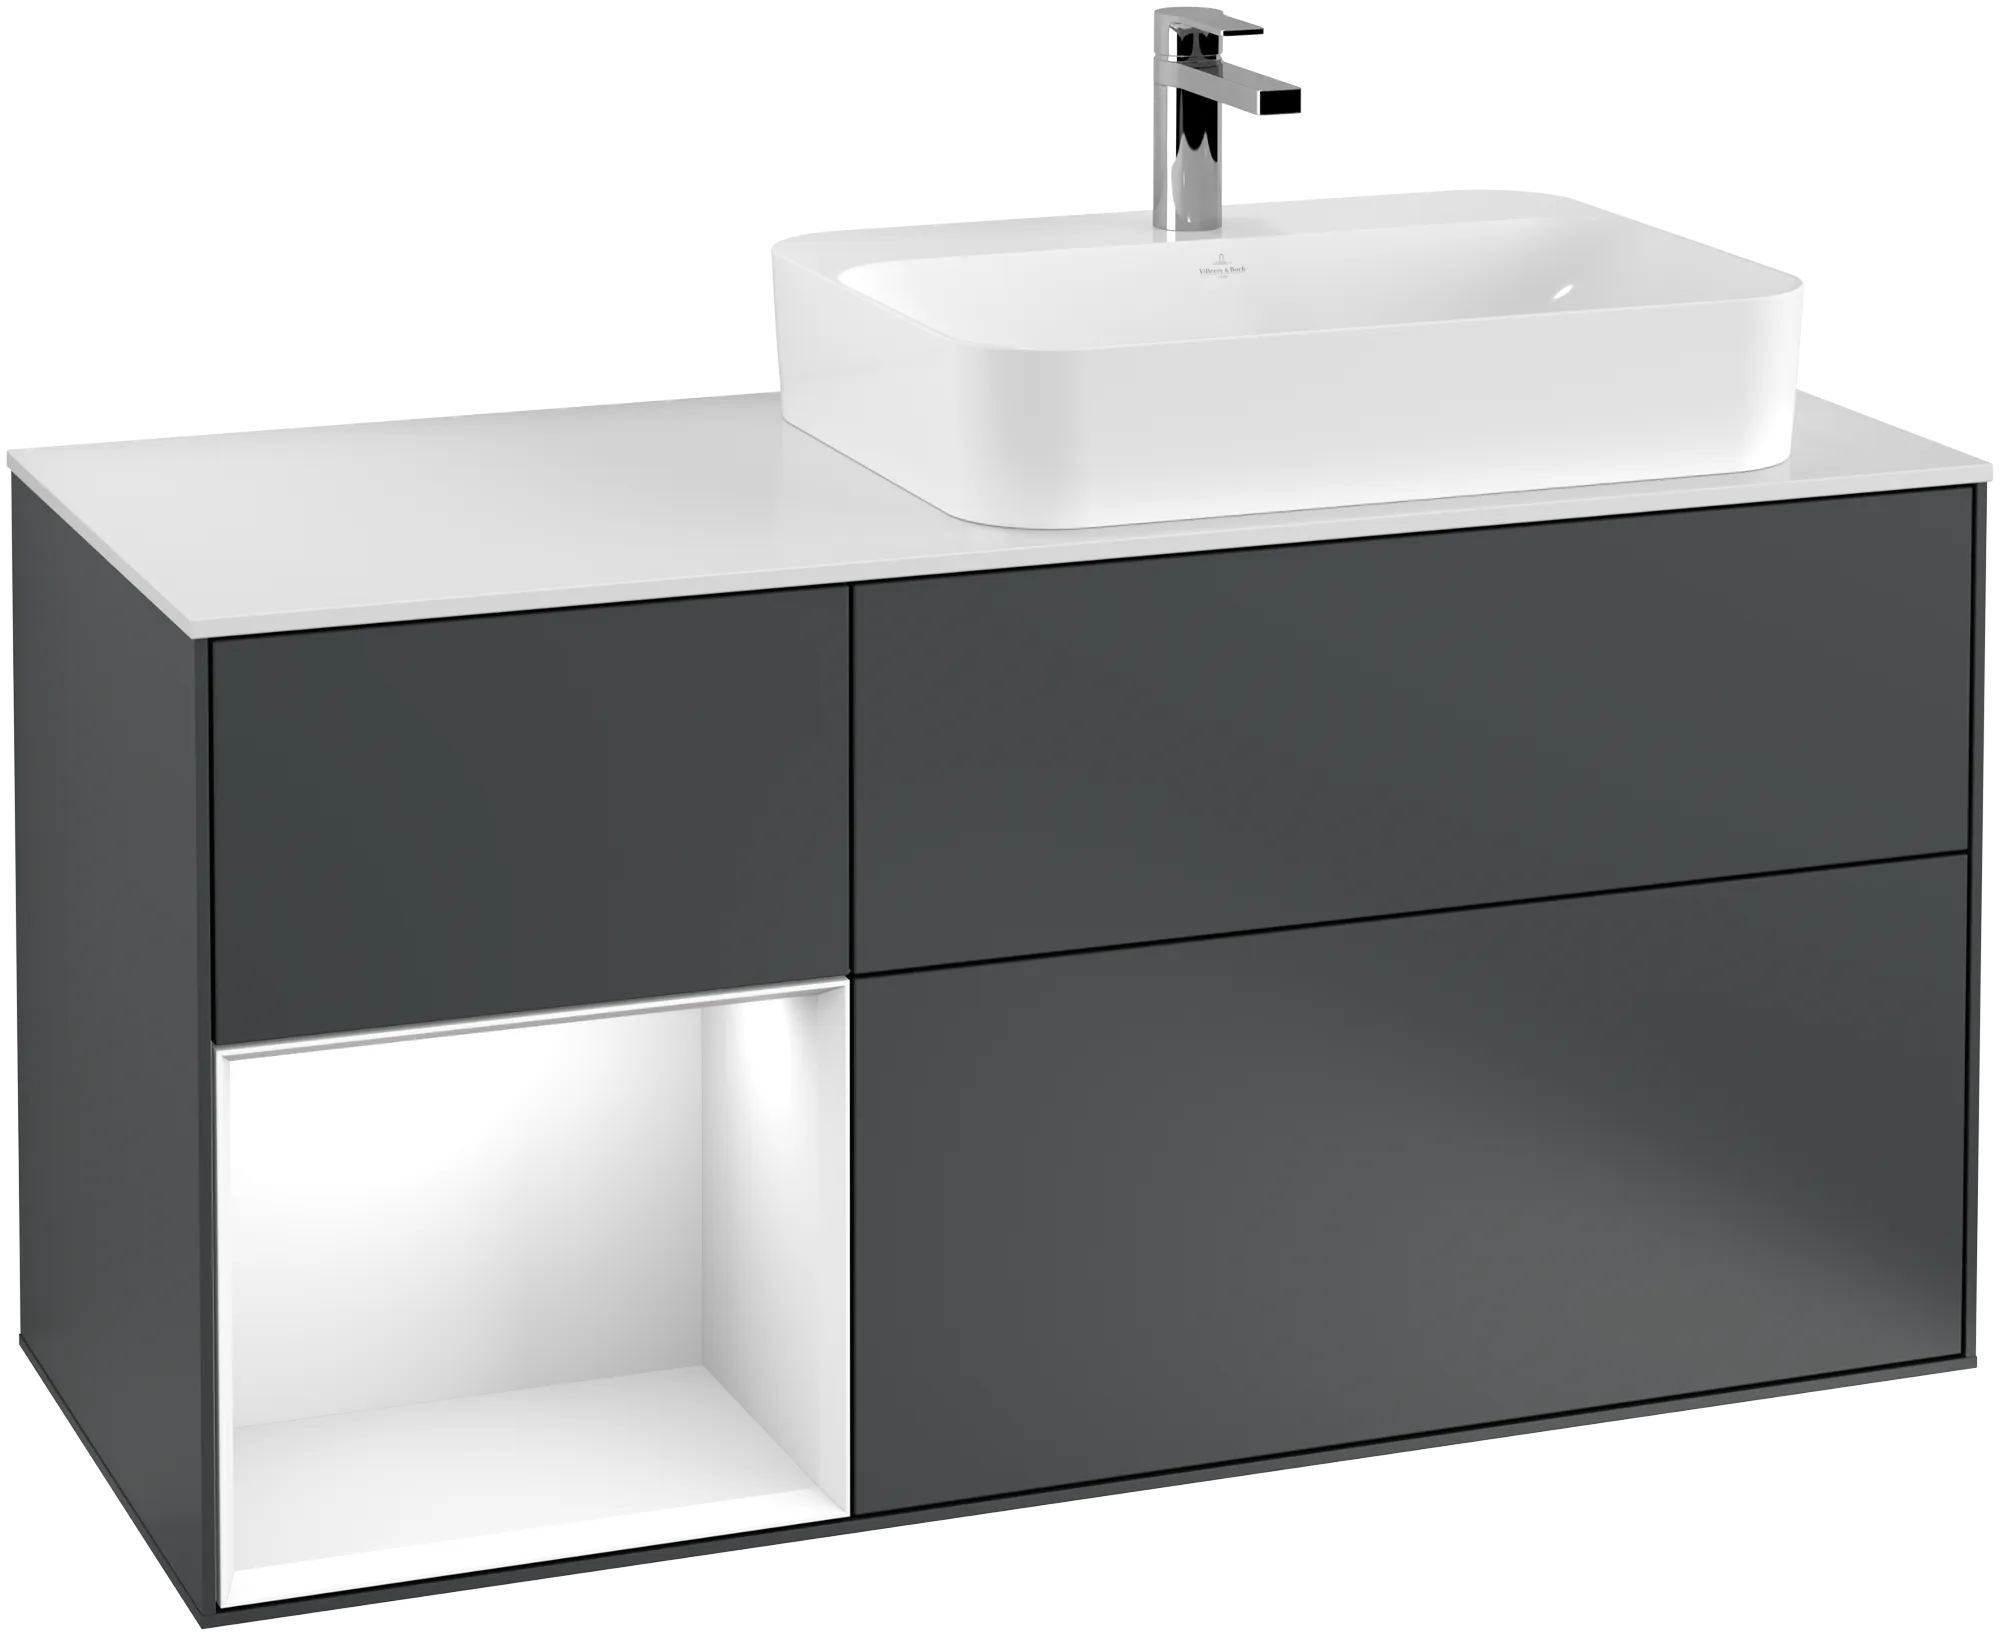 Obrázek VILLEROY BOCH Finion Vanity unit, with lighting, 3 pull-out compartments, 1200 x 603 x 501 mm, Midnight Blue Matt Lacquer / Glossy White Lacquer / Glass White Matt #G391GFHG